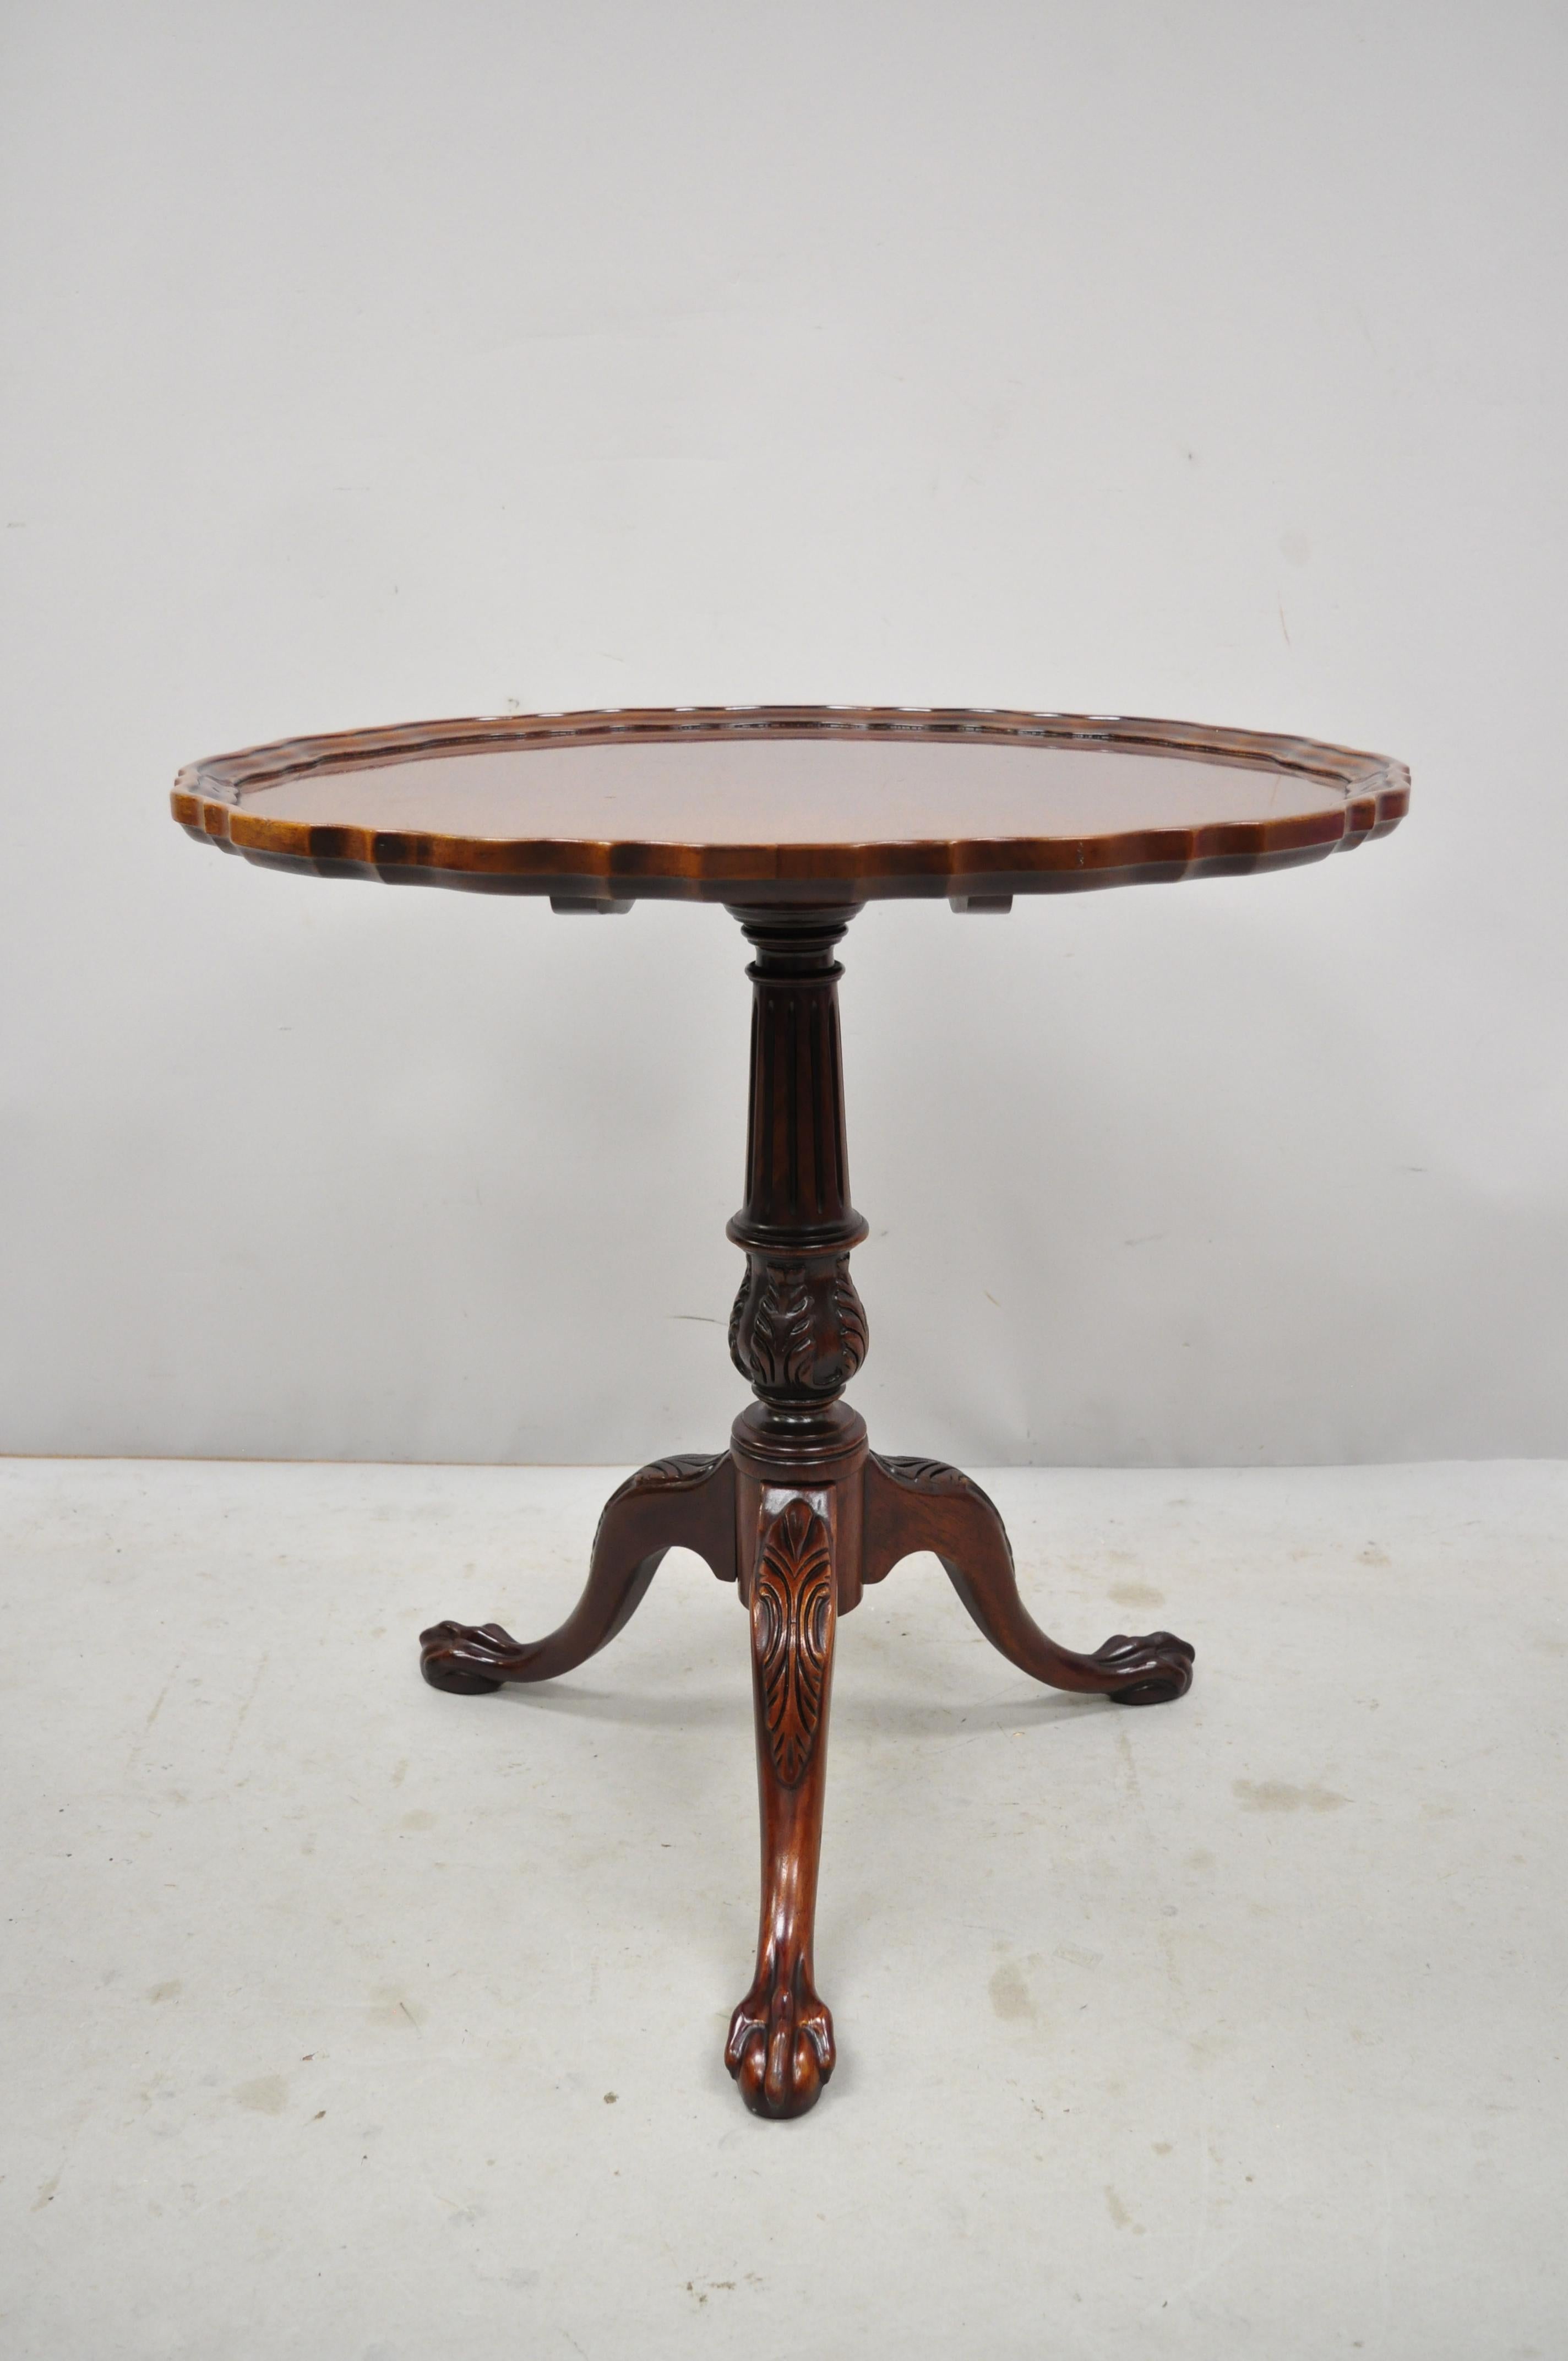 Mahogany Pie Crust Ball and Claw Georgian Chippendale Style tilt-top  Tea Table. Item includes a solid wood construction, beautiful wood grain, nicely carved details, carved ball and claw feet, solid brass hardware, very nice vintage item, quality